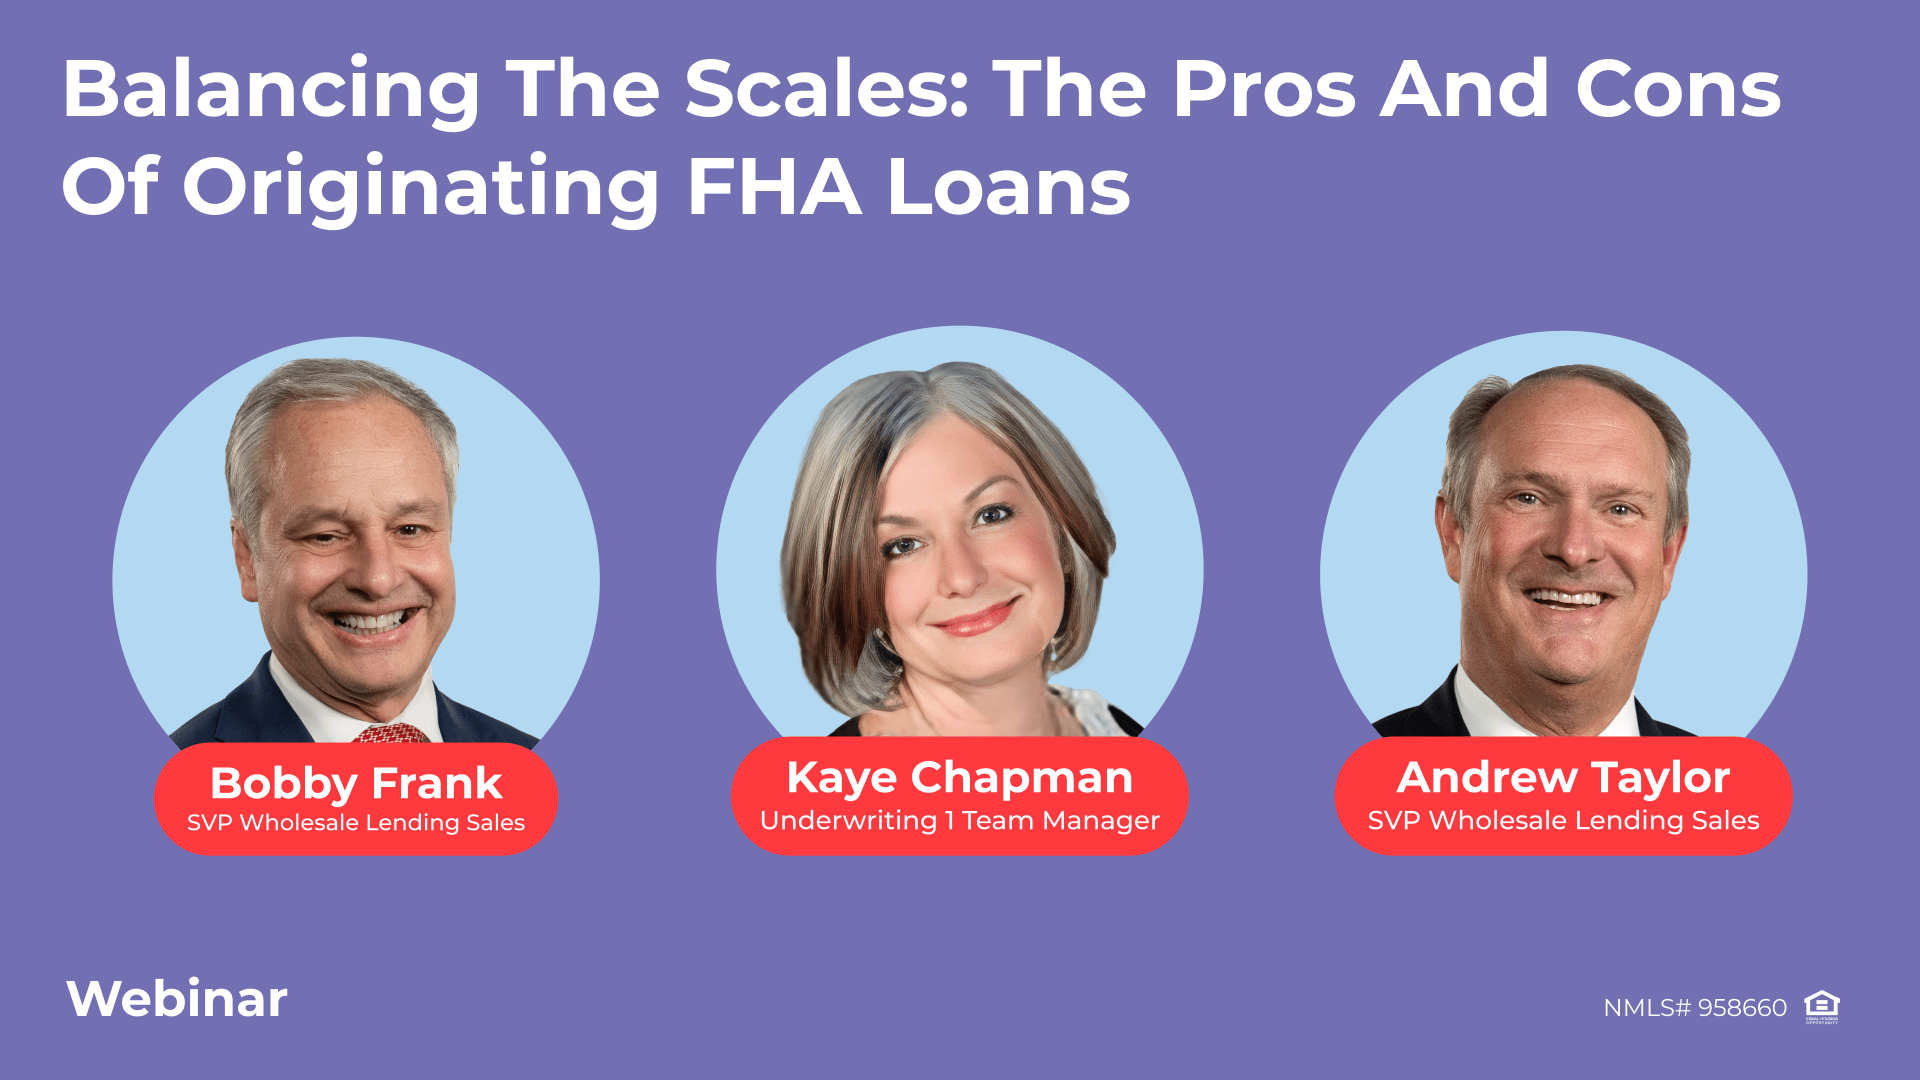 Balancing the Scales: The Pros and Cons of Originating FHA Loans